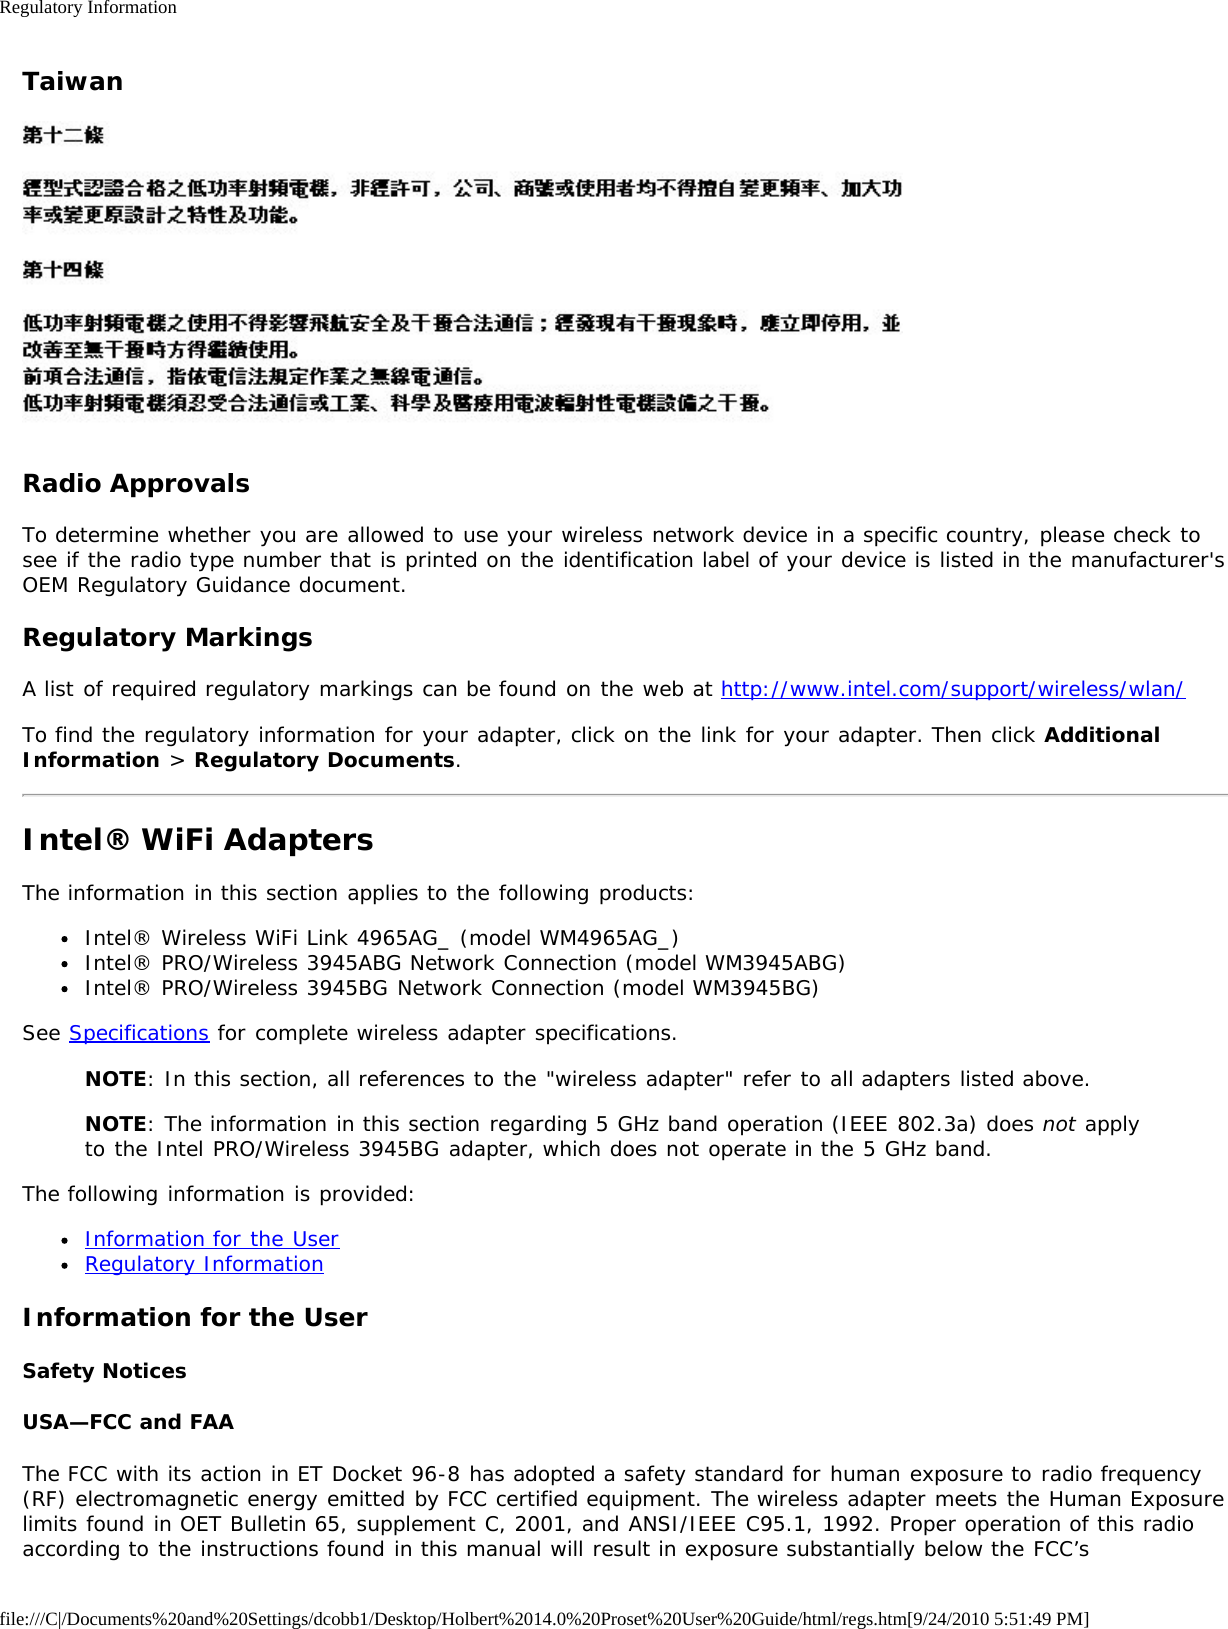 Regulatory Informationfile:///C|/Documents%20and%20Settings/dcobb1/Desktop/Holbert%2014.0%20Proset%20User%20Guide/html/regs.htm[9/24/2010 5:51:49 PM]TaiwanRadio ApprovalsTo determine whether you are allowed to use your wireless network device in a specific country, please check tosee if the radio type number that is printed on the identification label of your device is listed in the manufacturer&apos;sOEM Regulatory Guidance document.Regulatory MarkingsA list of required regulatory markings can be found on the web at http://www.intel.com/support/wireless/wlan/To find the regulatory information for your adapter, click on the link for your adapter. Then click AdditionalInformation &gt; Regulatory Documents.Intel® WiFi AdaptersThe information in this section applies to the following products:Intel® Wireless WiFi Link 4965AG_ (model WM4965AG_)Intel® PRO/Wireless 3945ABG Network Connection (model WM3945ABG)Intel® PRO/Wireless 3945BG Network Connection (model WM3945BG)See Specifications for complete wireless adapter specifications.NOTE: In this section, all references to the &quot;wireless adapter&quot; refer to all adapters listed above.NOTE: The information in this section regarding 5 GHz band operation (IEEE 802.3a) does not applyto the Intel PRO/Wireless 3945BG adapter, which does not operate in the 5 GHz band.The following information is provided:Information for the UserRegulatory InformationInformation for the UserSafety NoticesUSA—FCC and FAAThe FCC with its action in ET Docket 96-8 has adopted a safety standard for human exposure to radio frequency(RF) electromagnetic energy emitted by FCC certified equipment. The wireless adapter meets the Human Exposurelimits found in OET Bulletin 65, supplement C, 2001, and ANSI/IEEE C95.1, 1992. Proper operation of this radioaccording to the instructions found in this manual will result in exposure substantially below the FCC’s